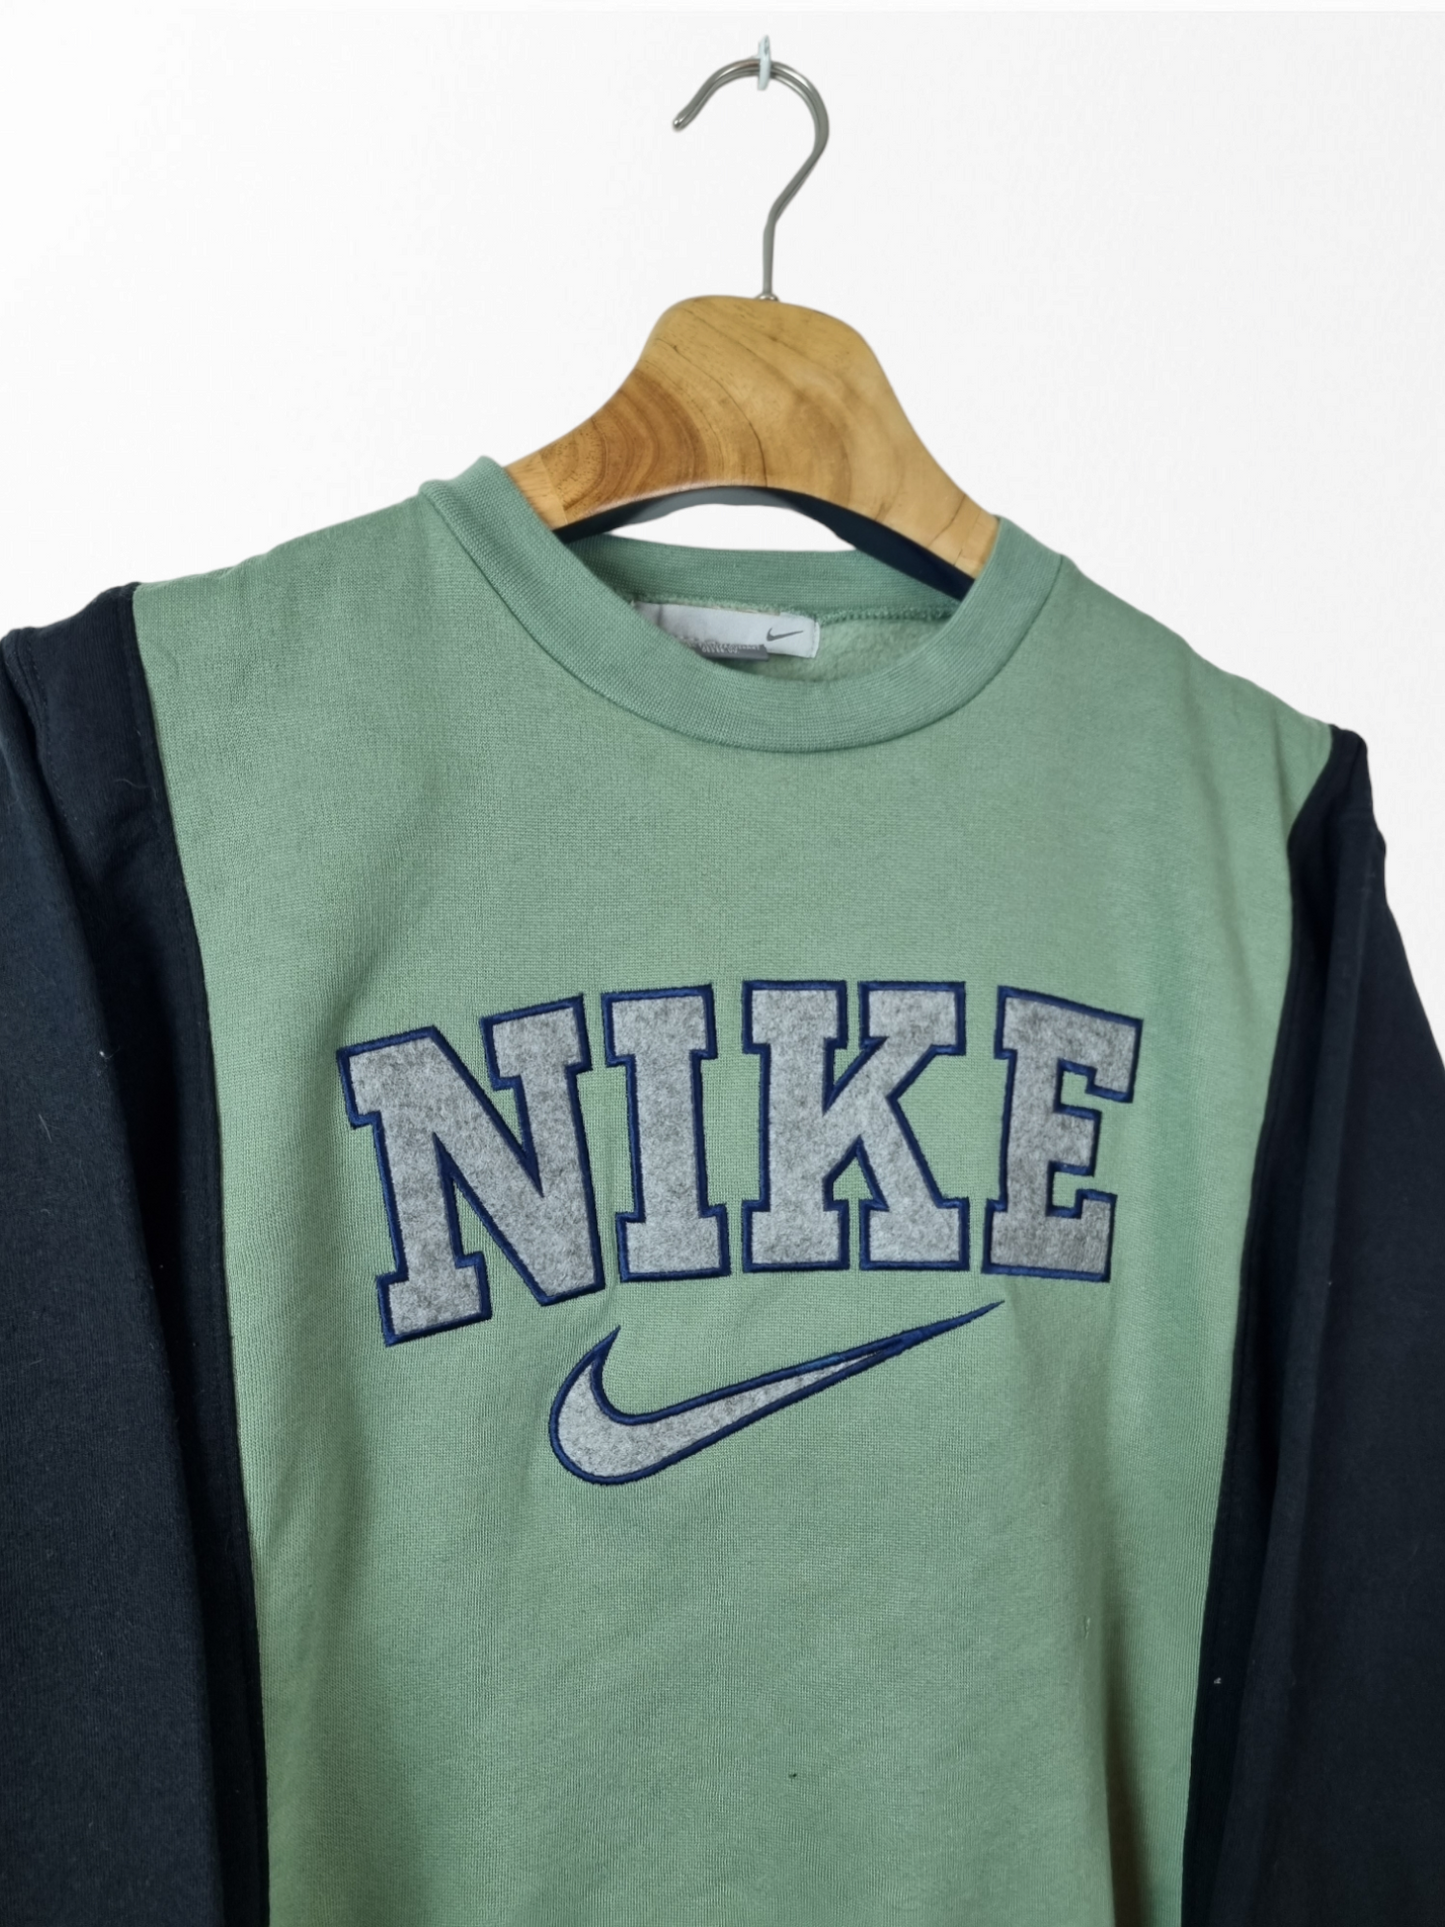 Nike Spell out sweater maat S